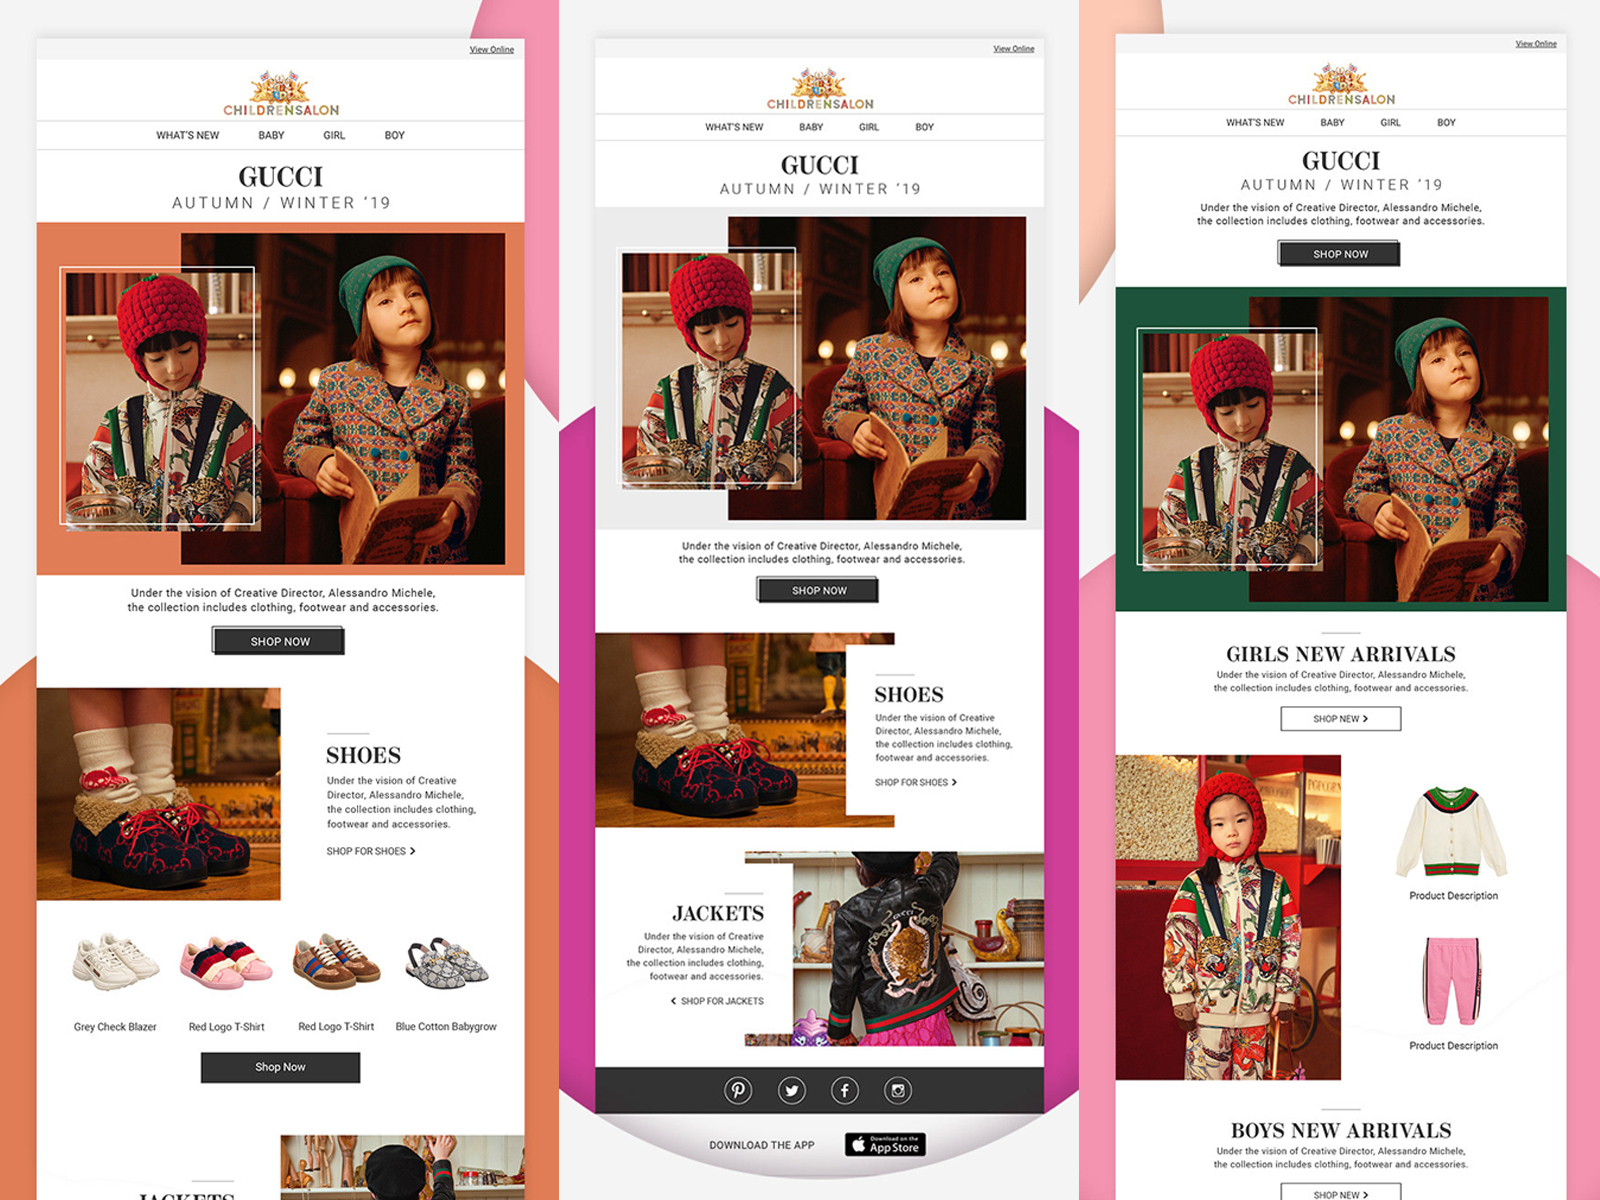 toediening gewoon nicotine gucci Newsletter designs by Whitney Samuels on Dribbble